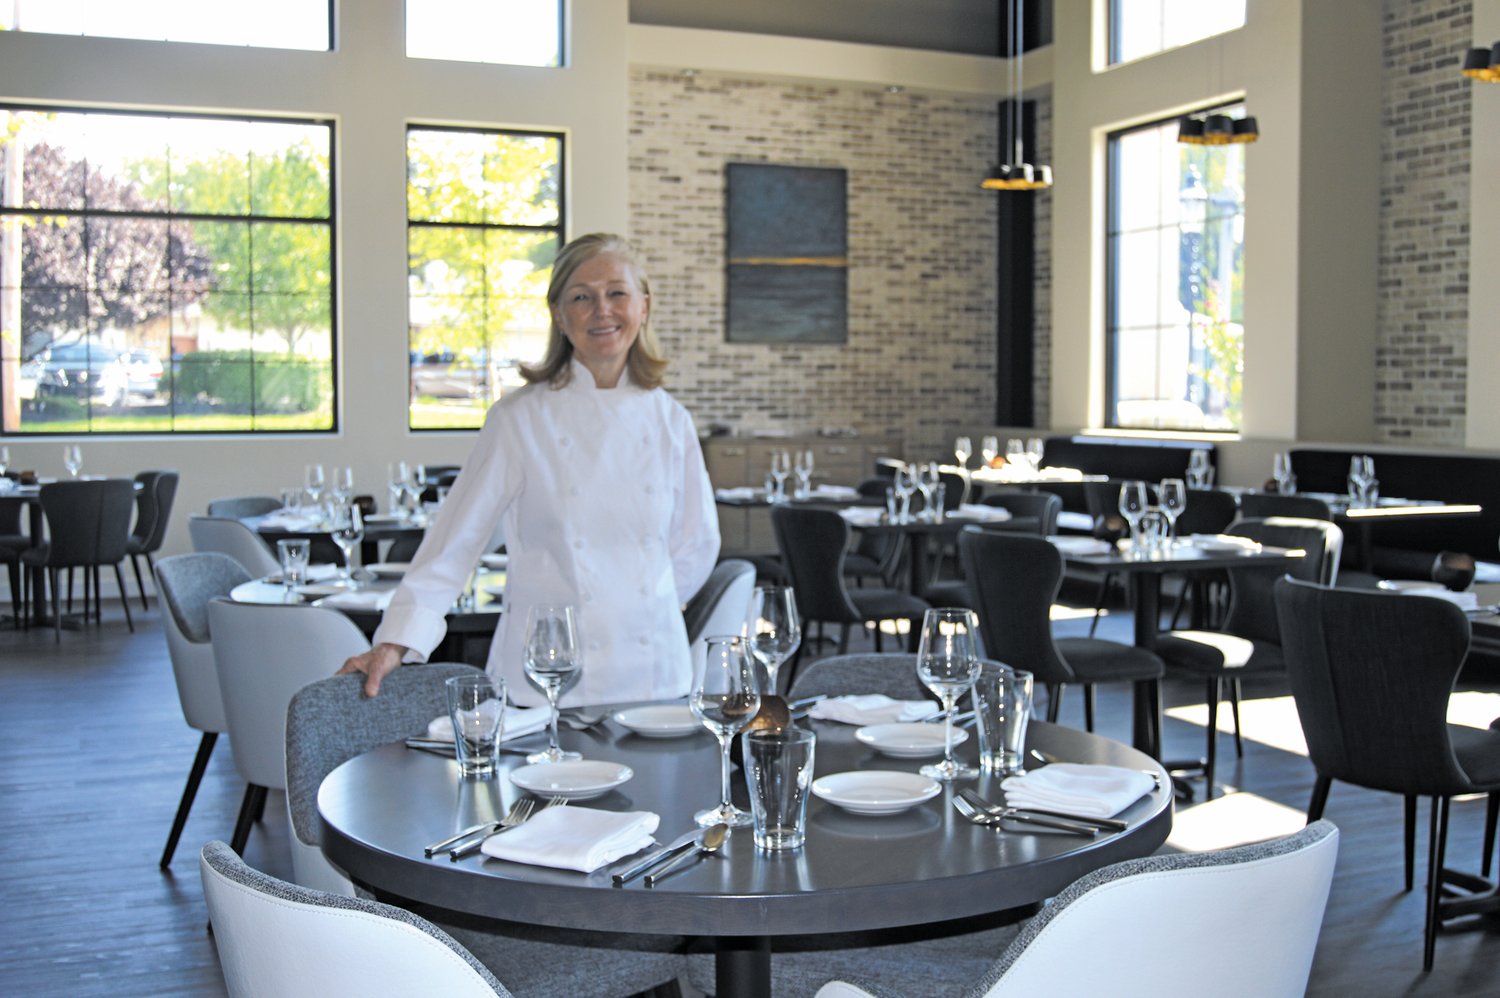 Vela, which is Doylestown’s newest restaurant, is owned by chef Donna Ewanciw. Photograph by Susan S. Yeske